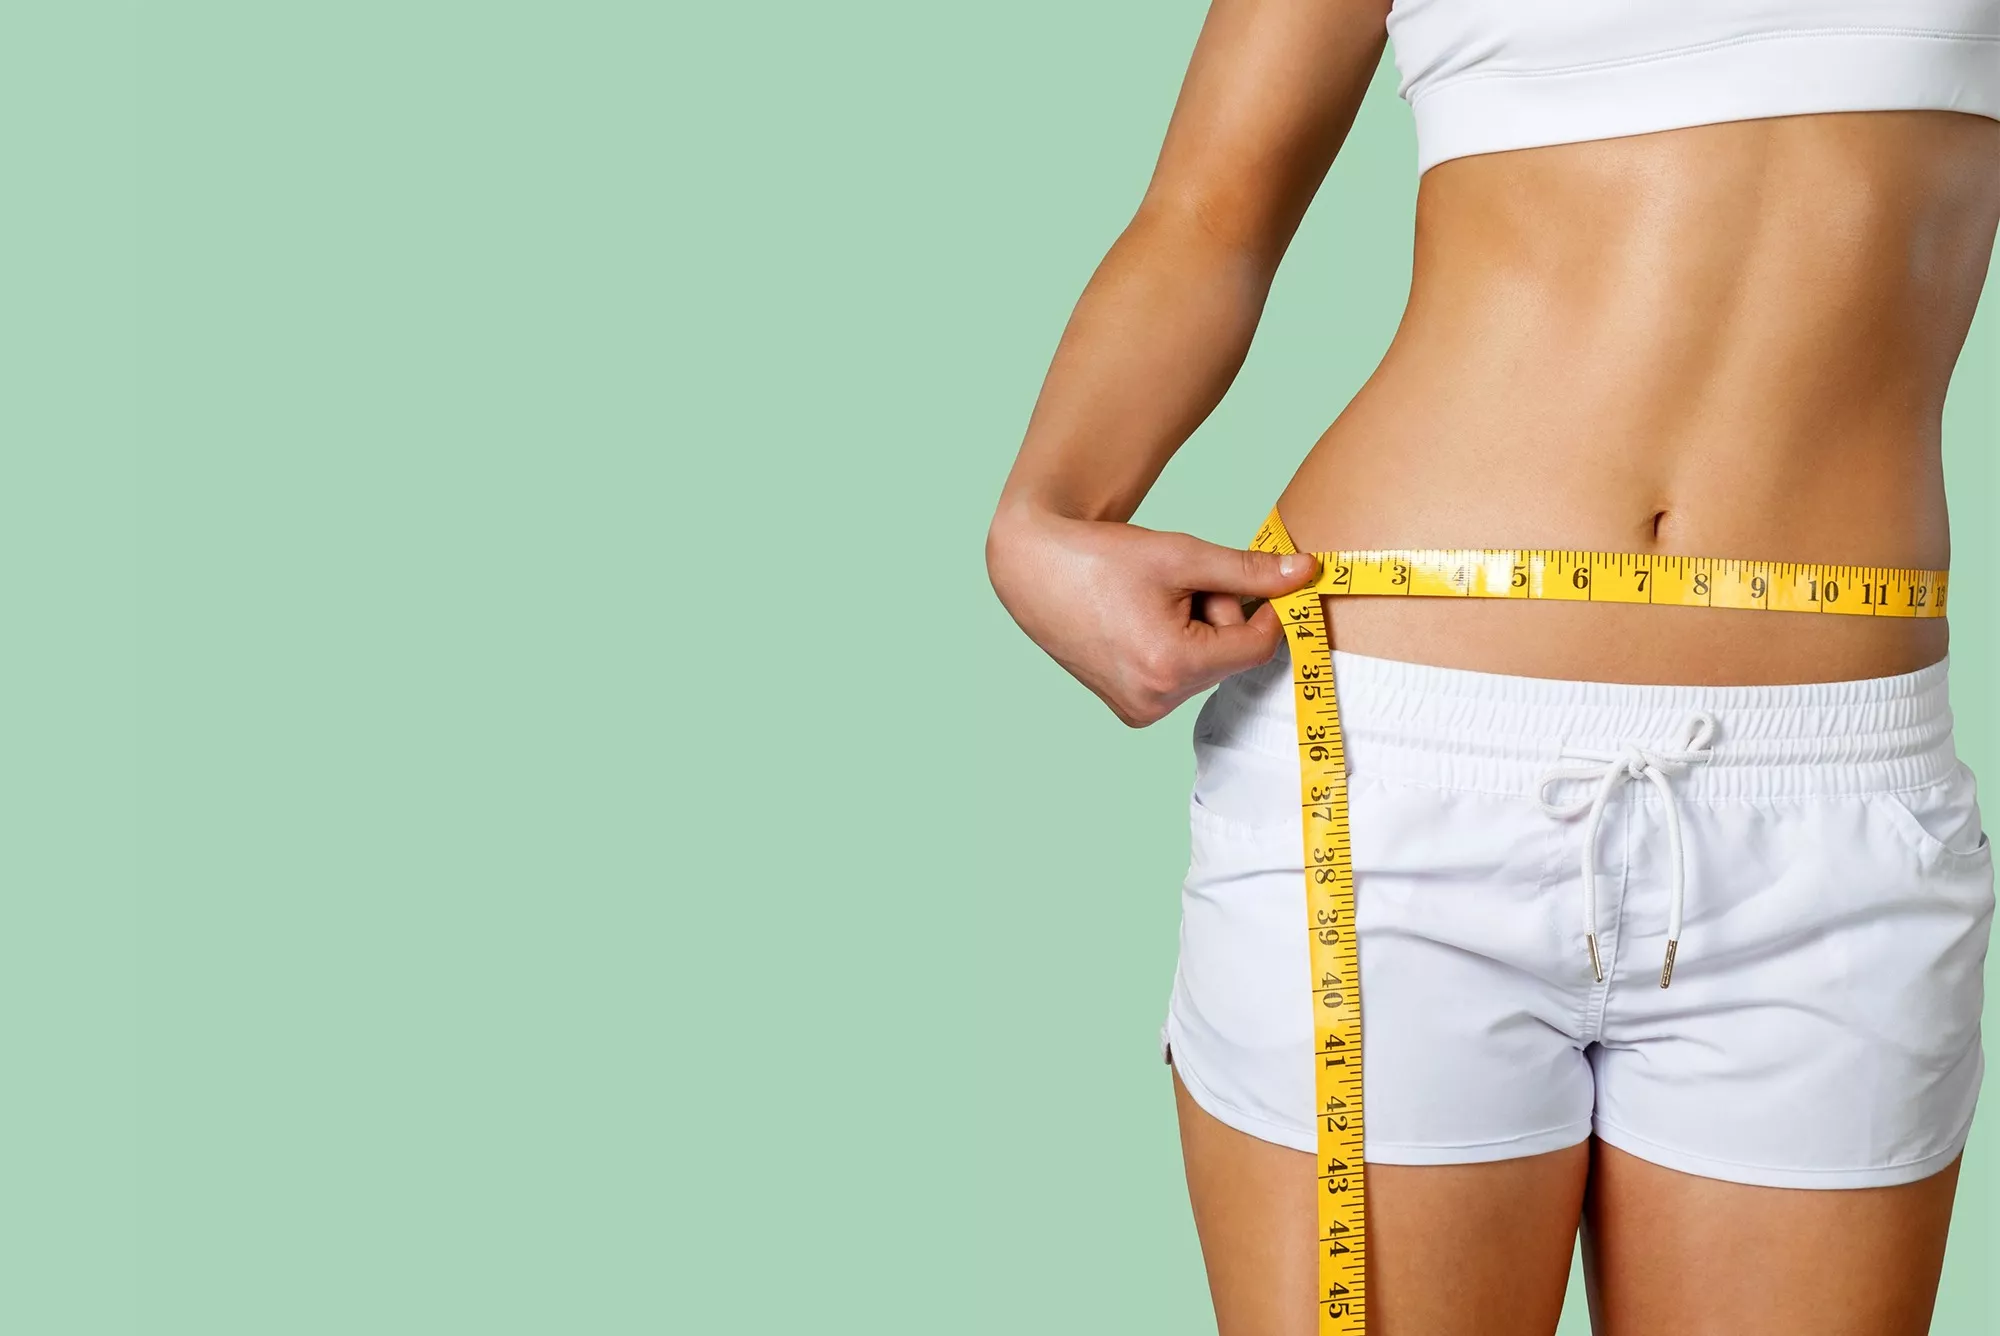 What are the ideal 1-month methods to slim your waist?